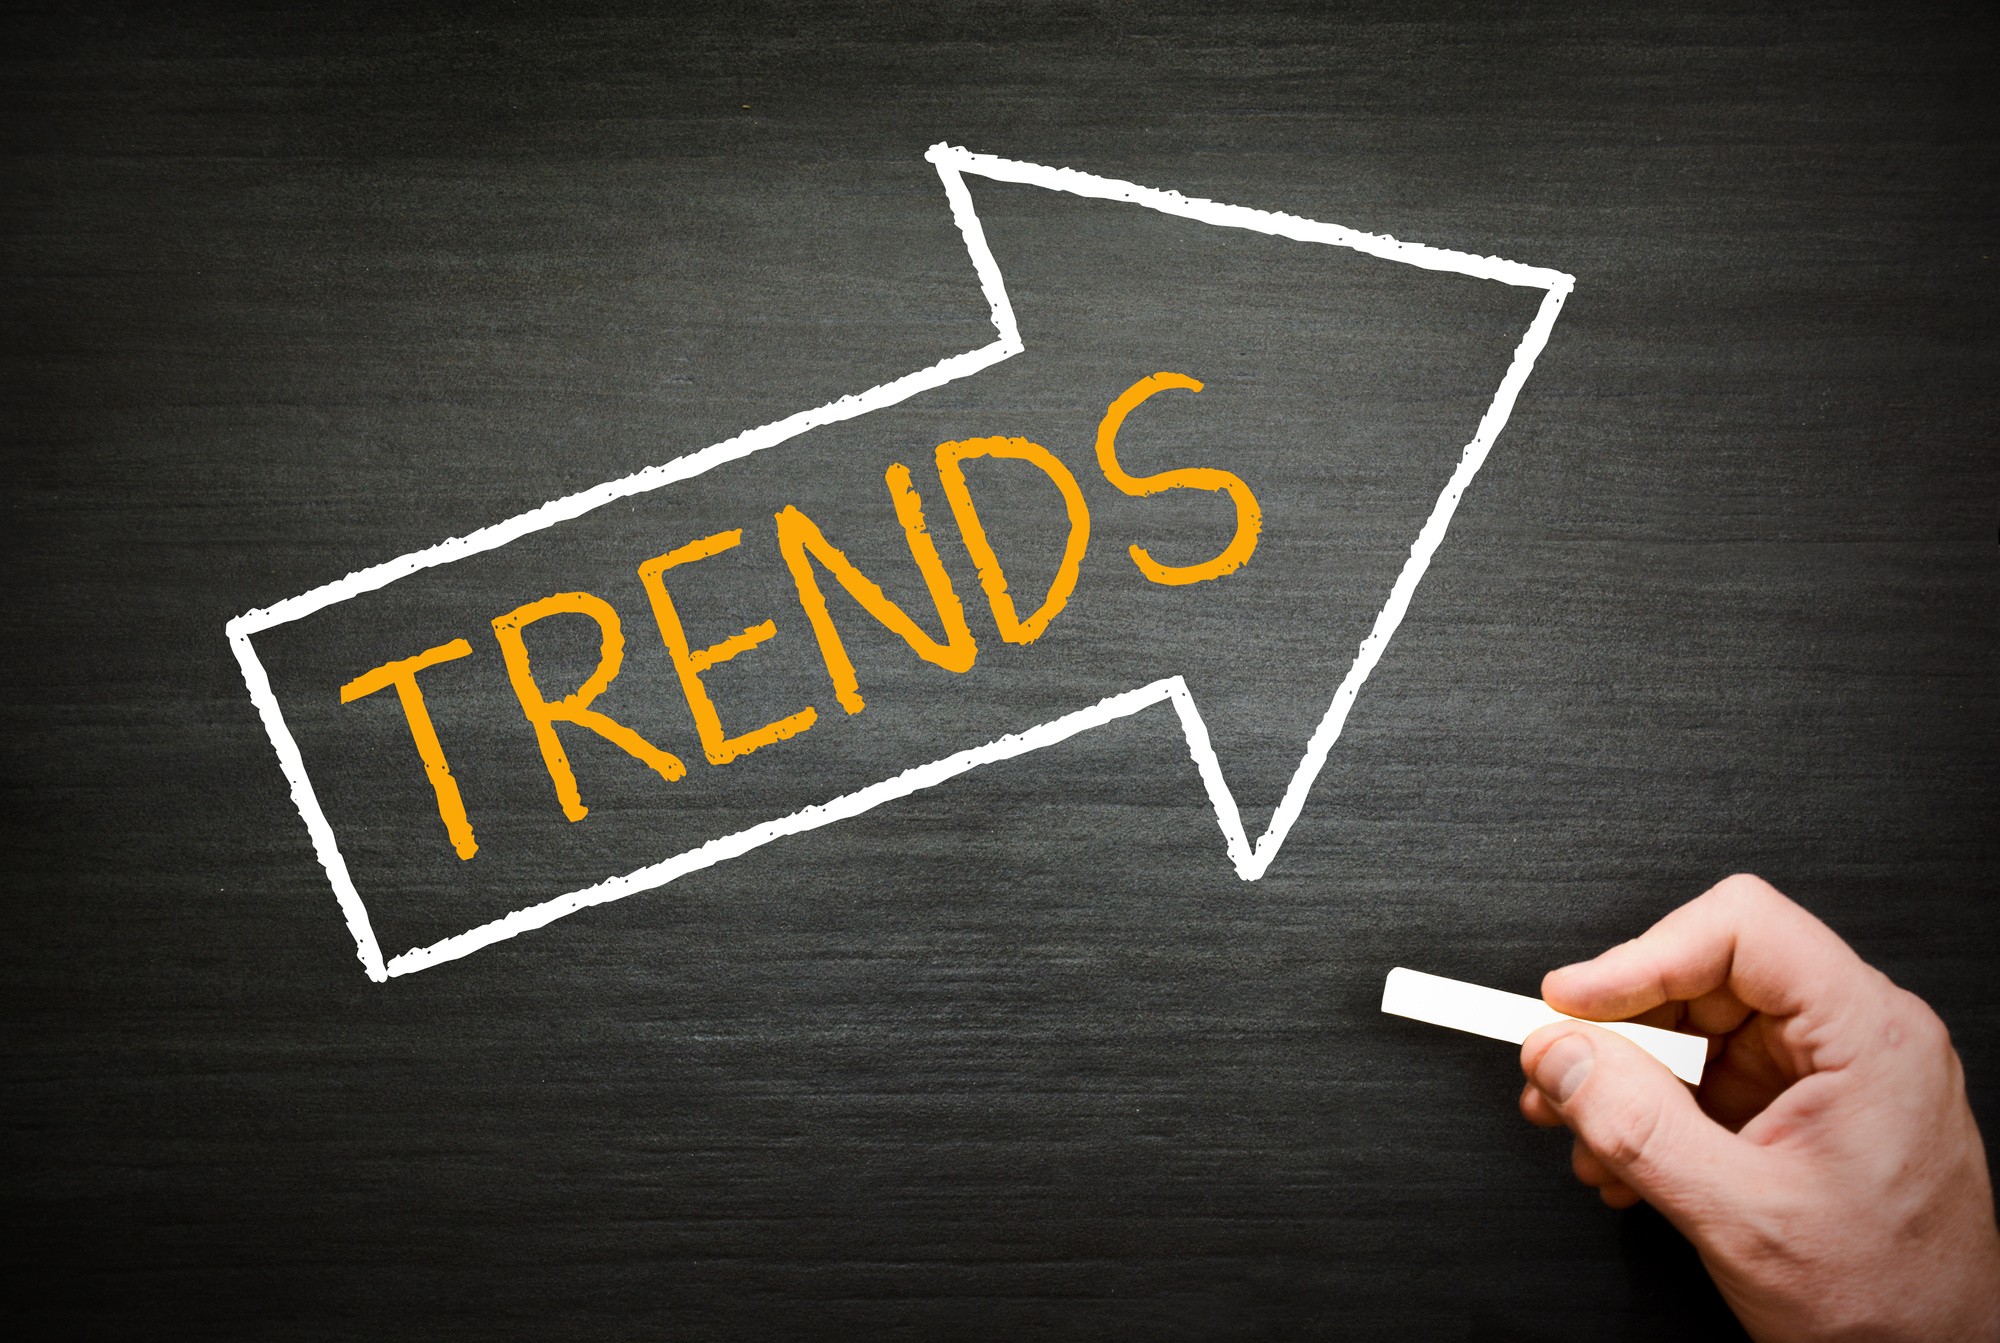 7 Digital Marketing Trends to Keep an Eye on in 2022